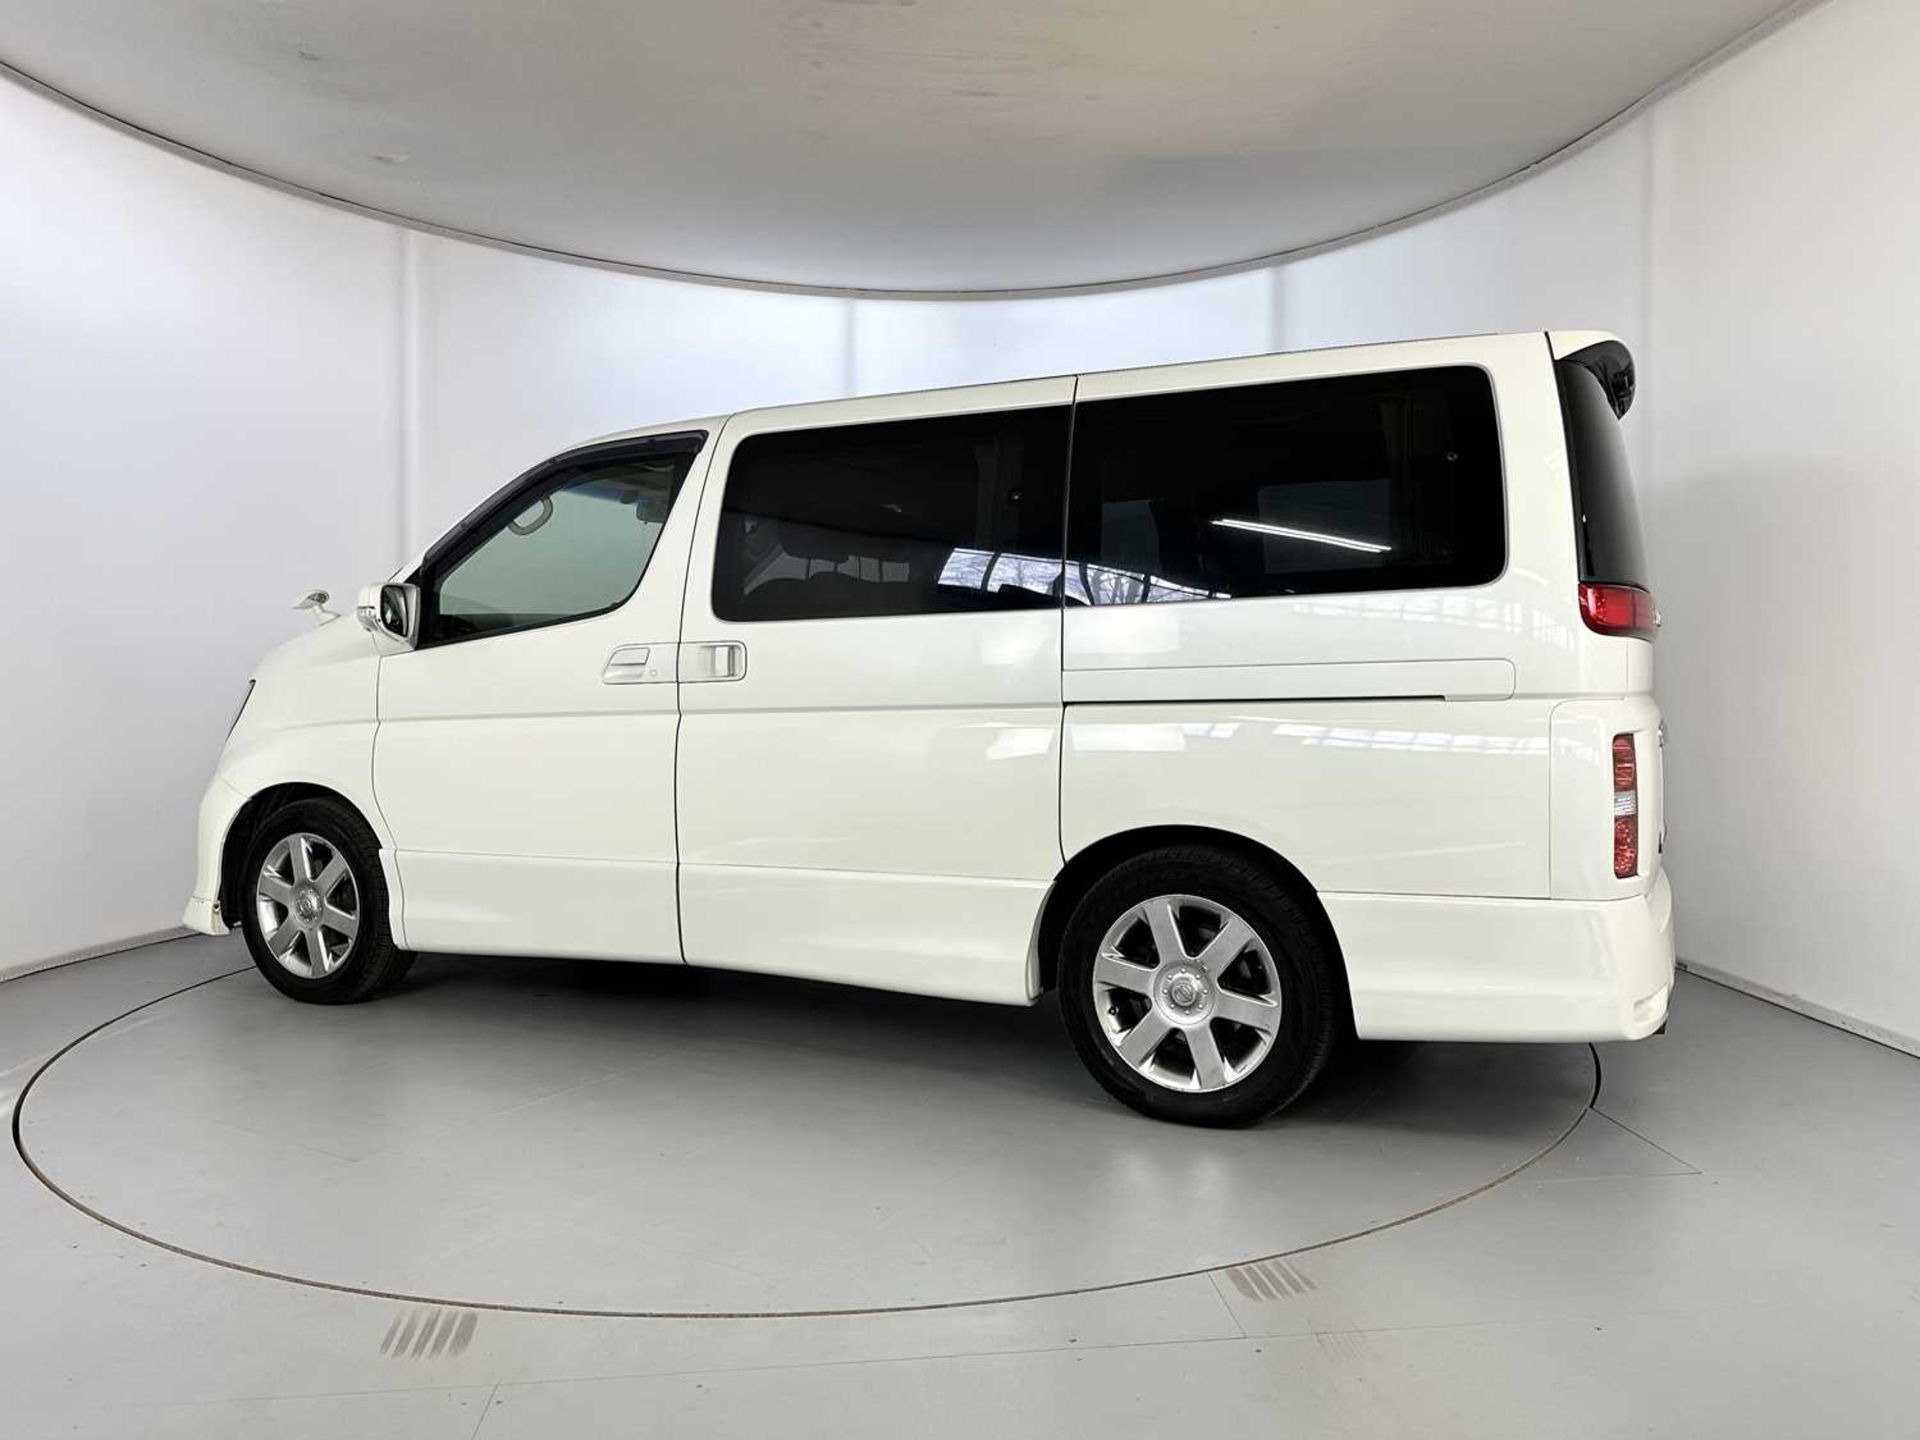 2007 Nissan Elgrand - Highway Star Edition 4WD - Image 6 of 39